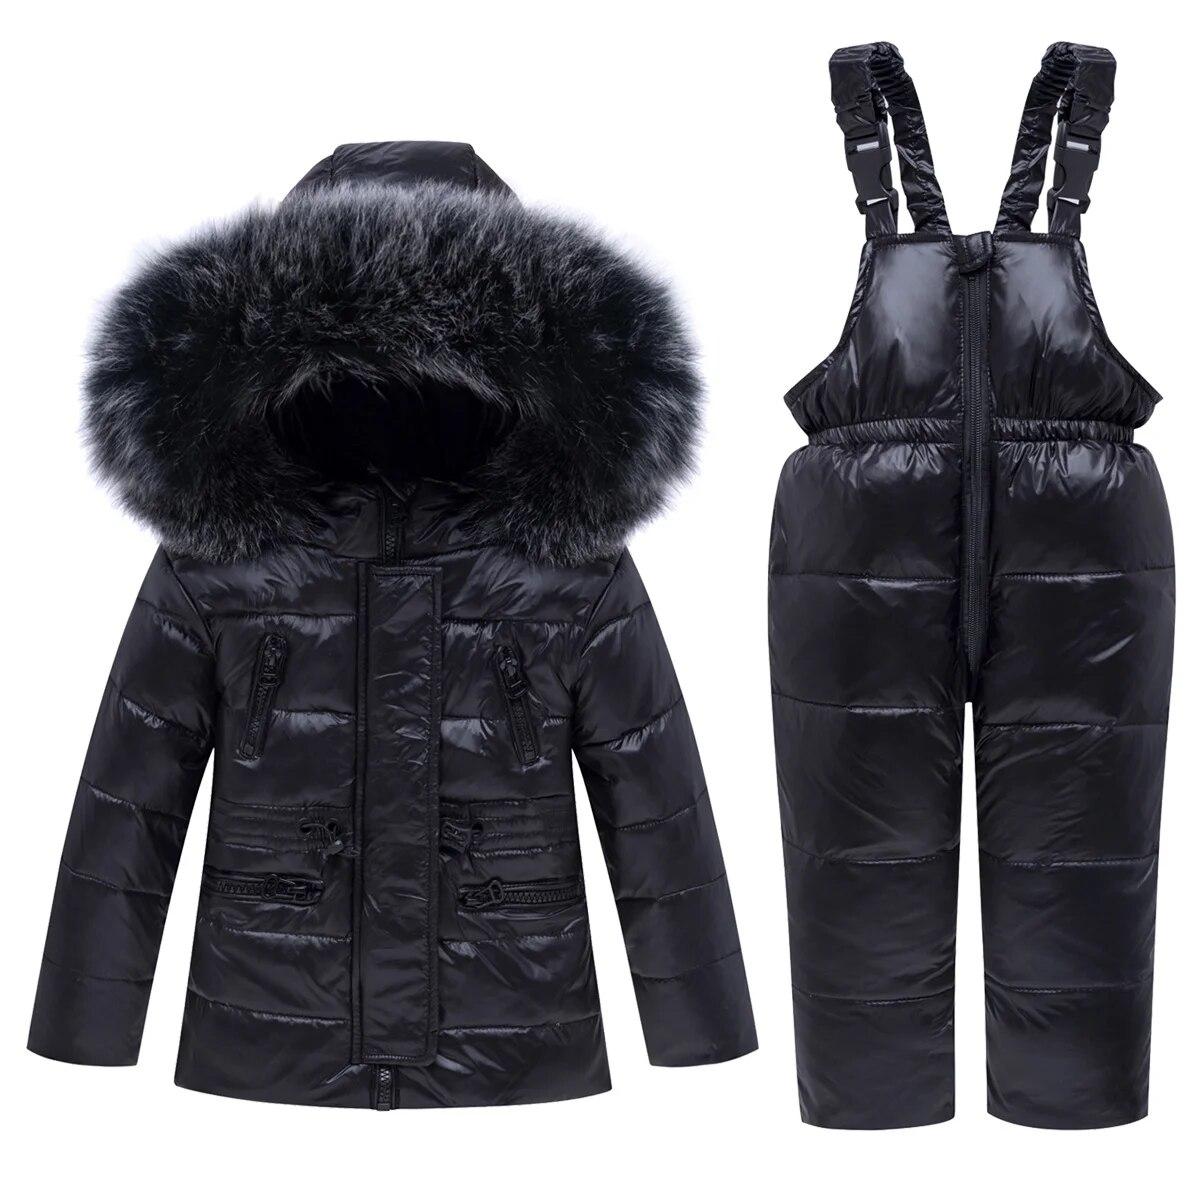 2023 Warm Down Jacket Children Winter Suit Boys Baby Thin Coat + Pants Toddler Clothing Set Girl Clothes Overalls Kids S